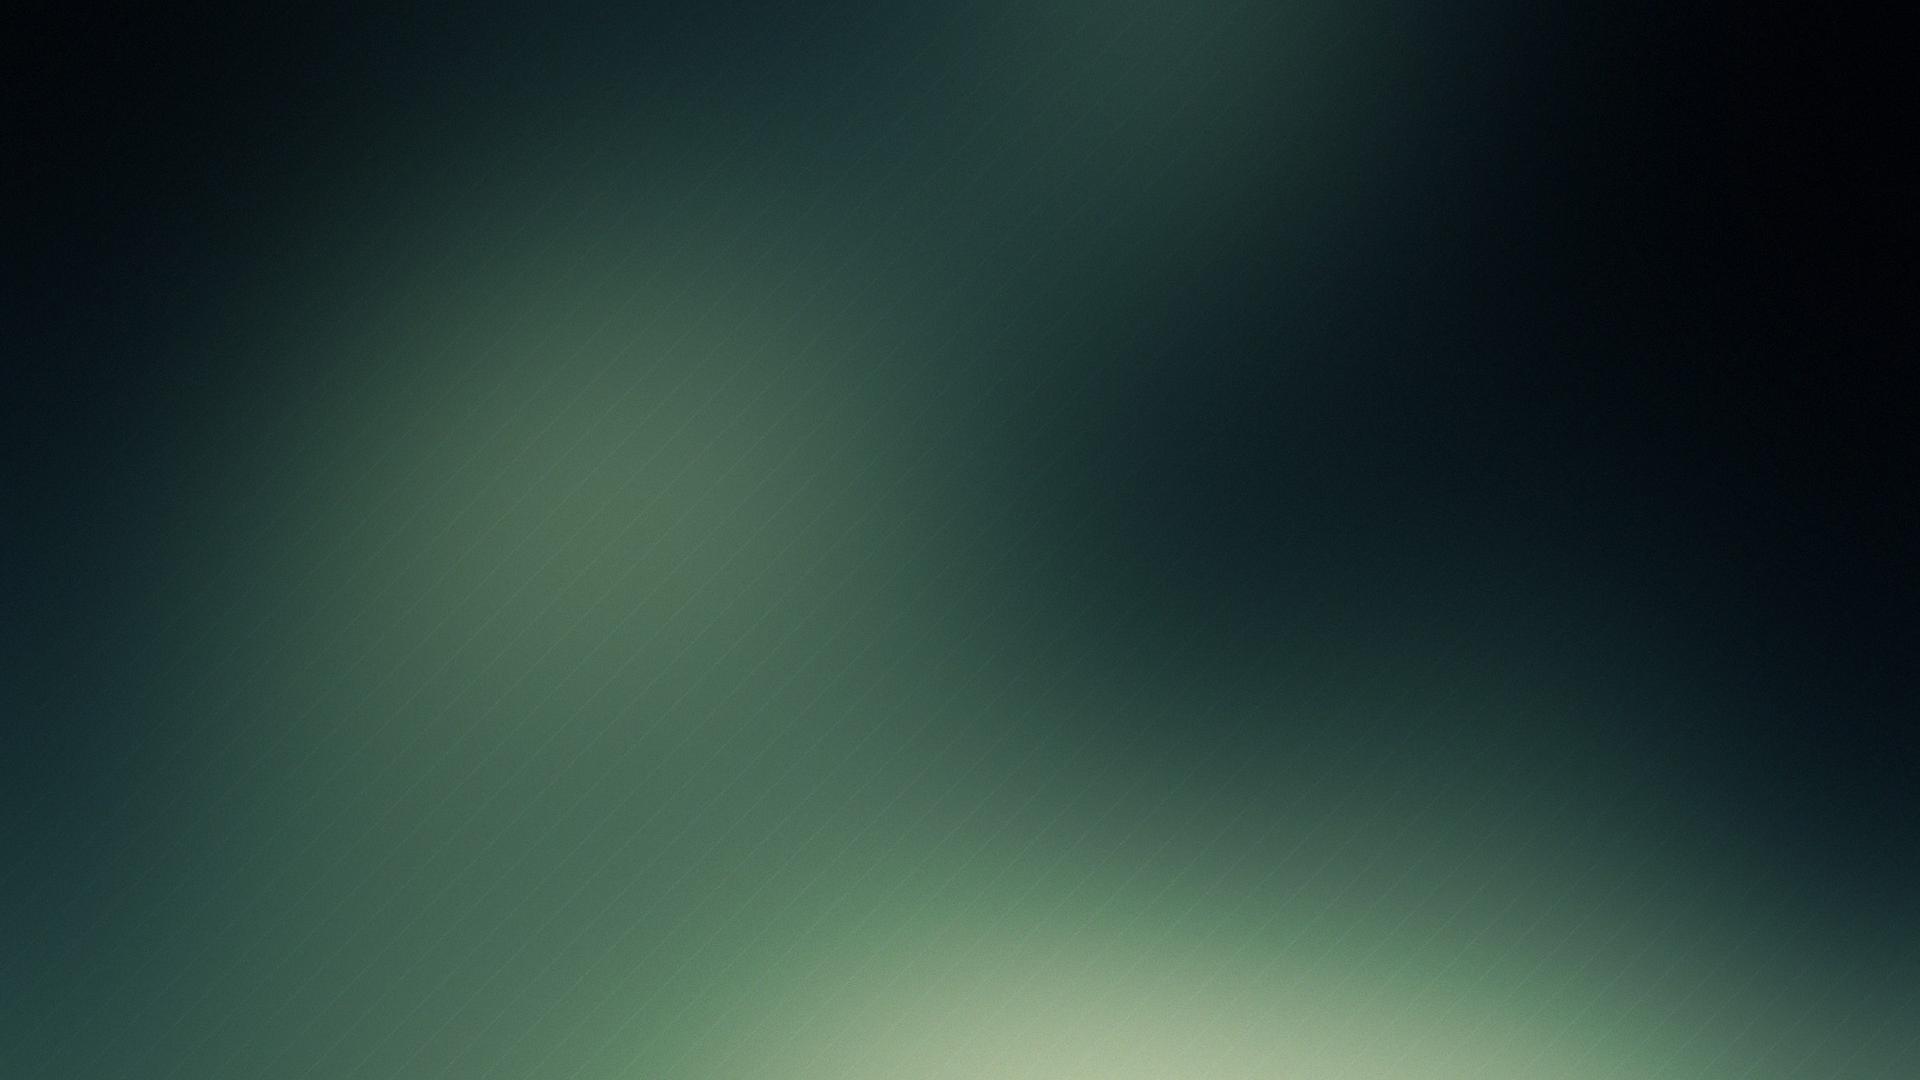 Blurred Gradient Wallpapers - Top Free Blurred Gradient Backgrounds ...